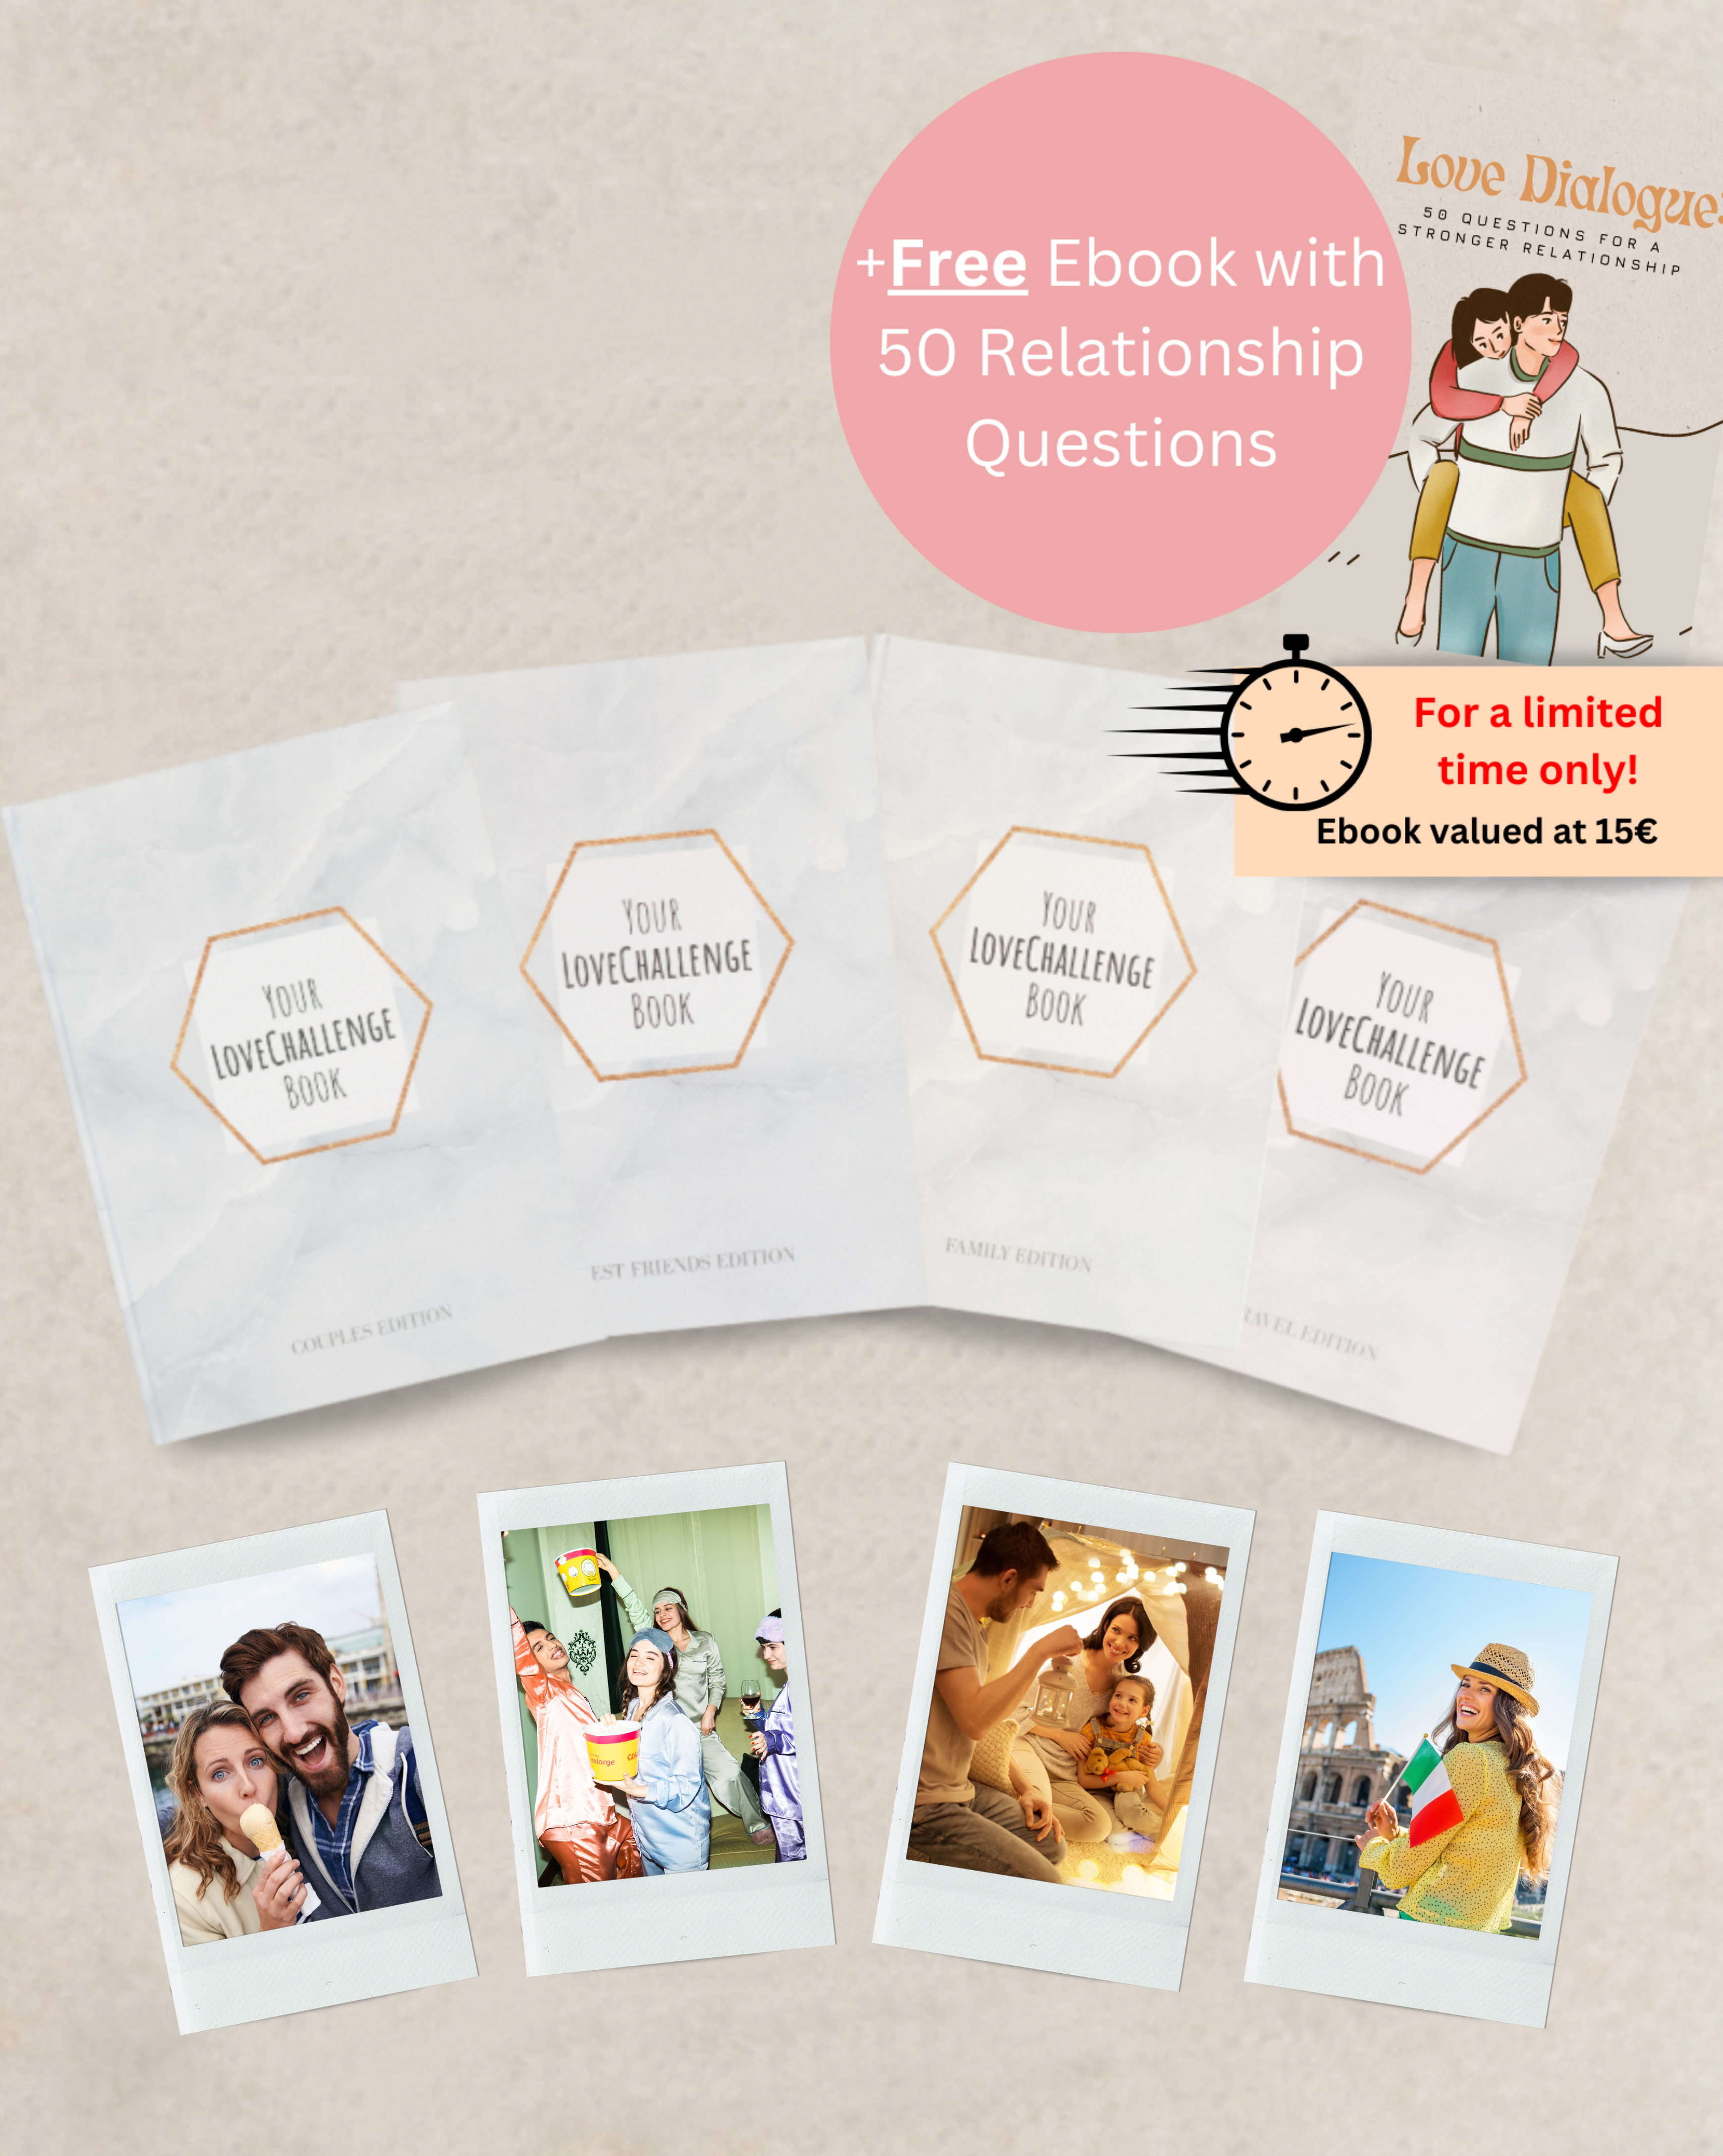 All in one Bundle - (Couple + Friends + Travel + Family Edition + free Love Dialogue E-Book)